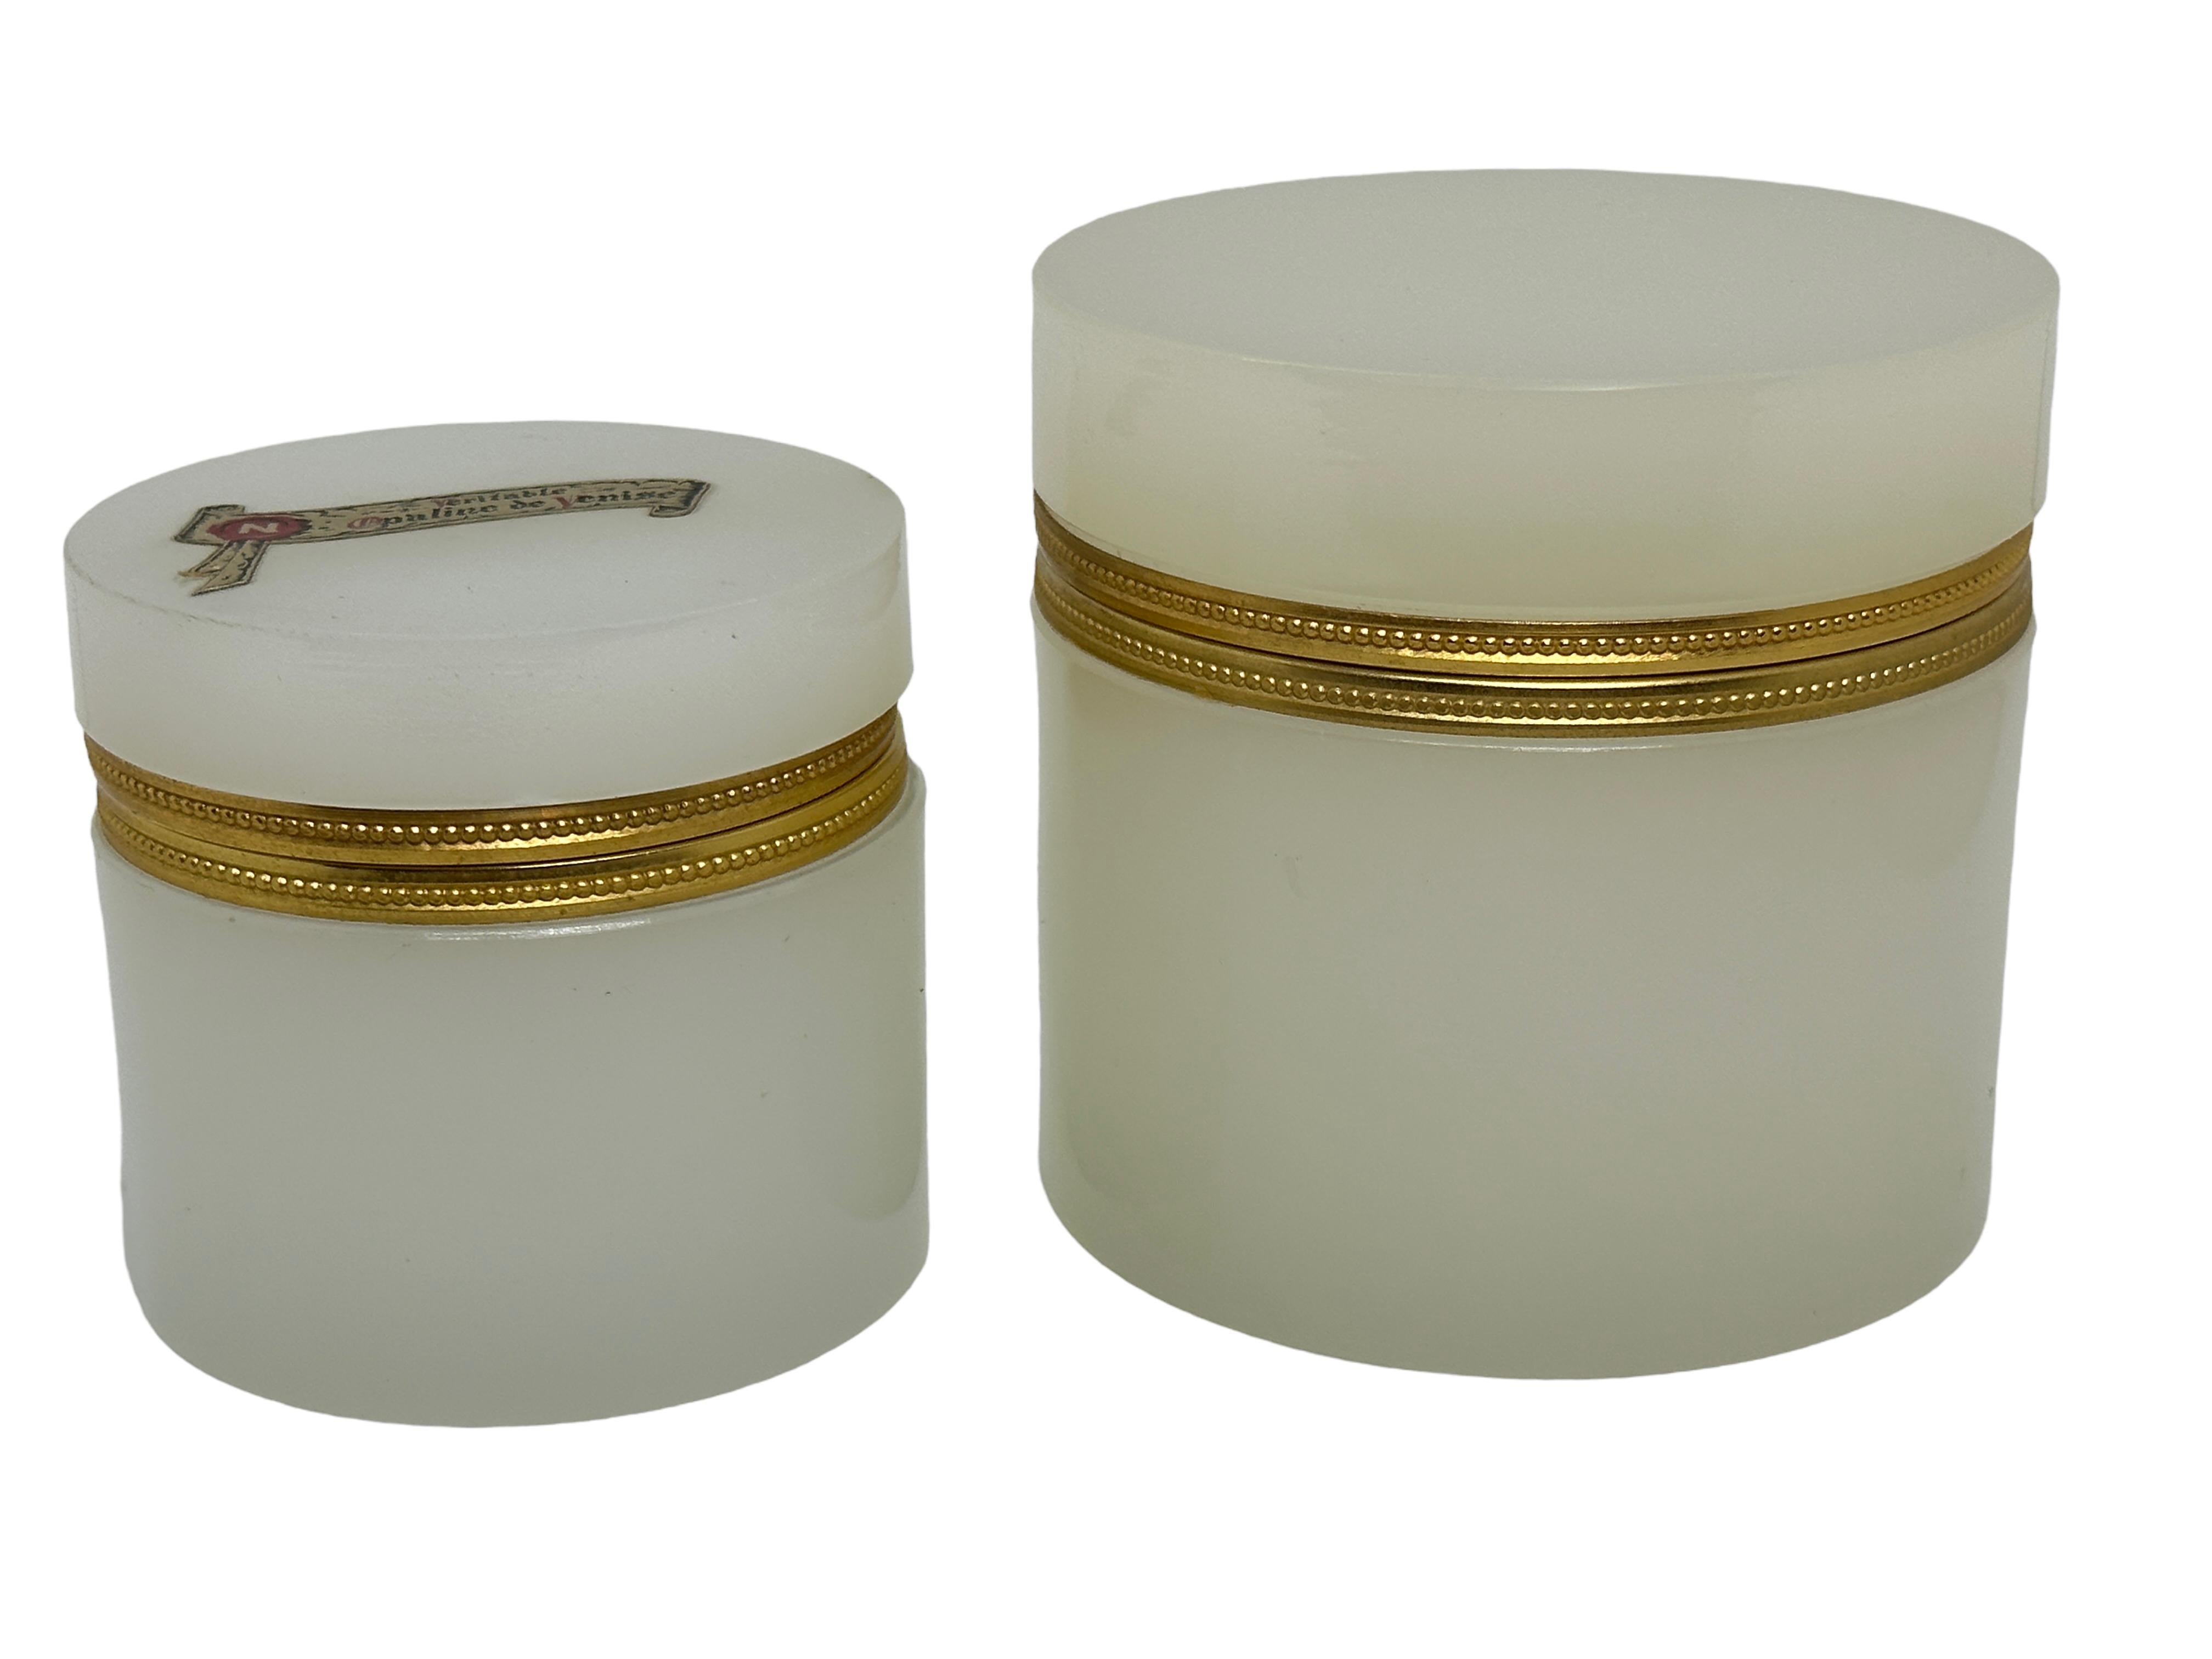 A set of two beautiful jewelry boxes with glass lids made of opal glass. This type of jewelry box was mainly made in France, Italy and earlier in Bohemia. They were made from the early 19th century to the mid 20th century. However, the heyday of